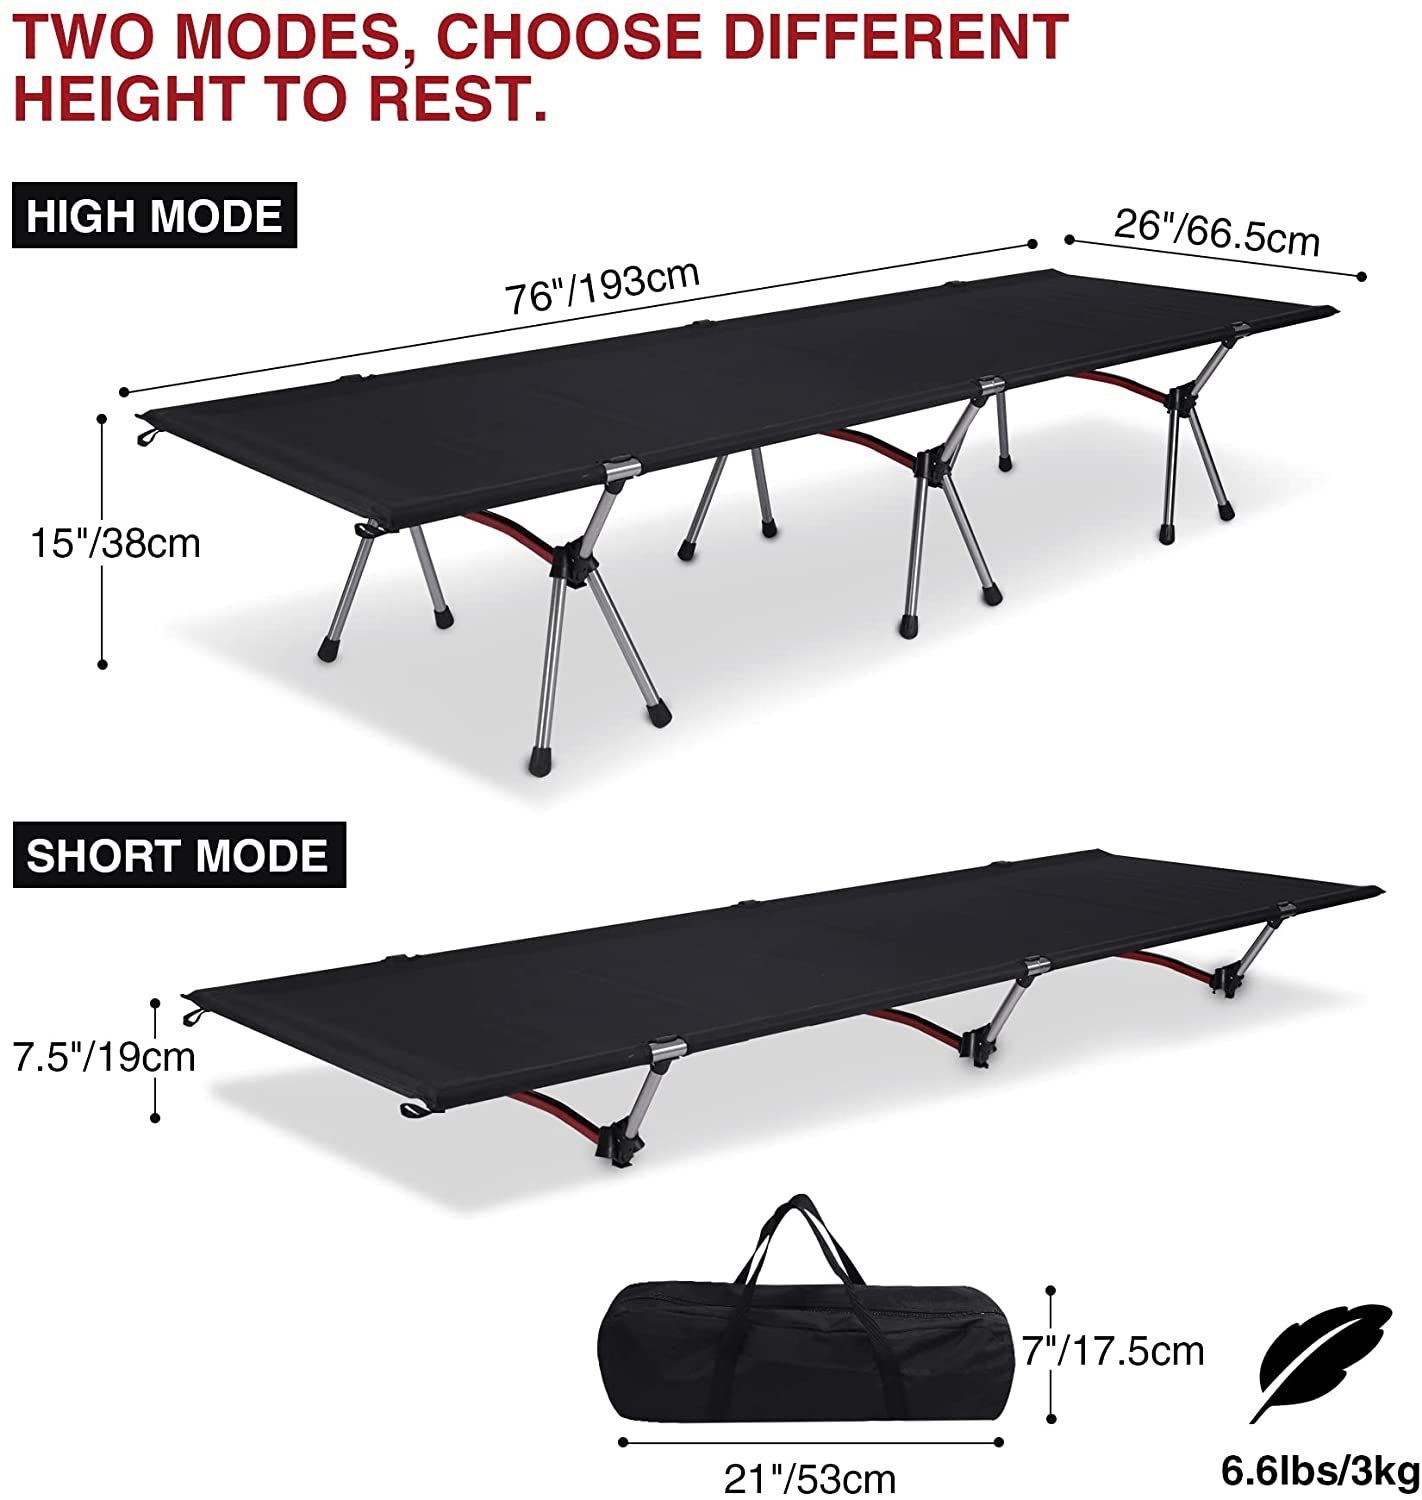 Ultra-lightweight folding camping bed - Tesery Official Store - Tesla Premium Accessories Store